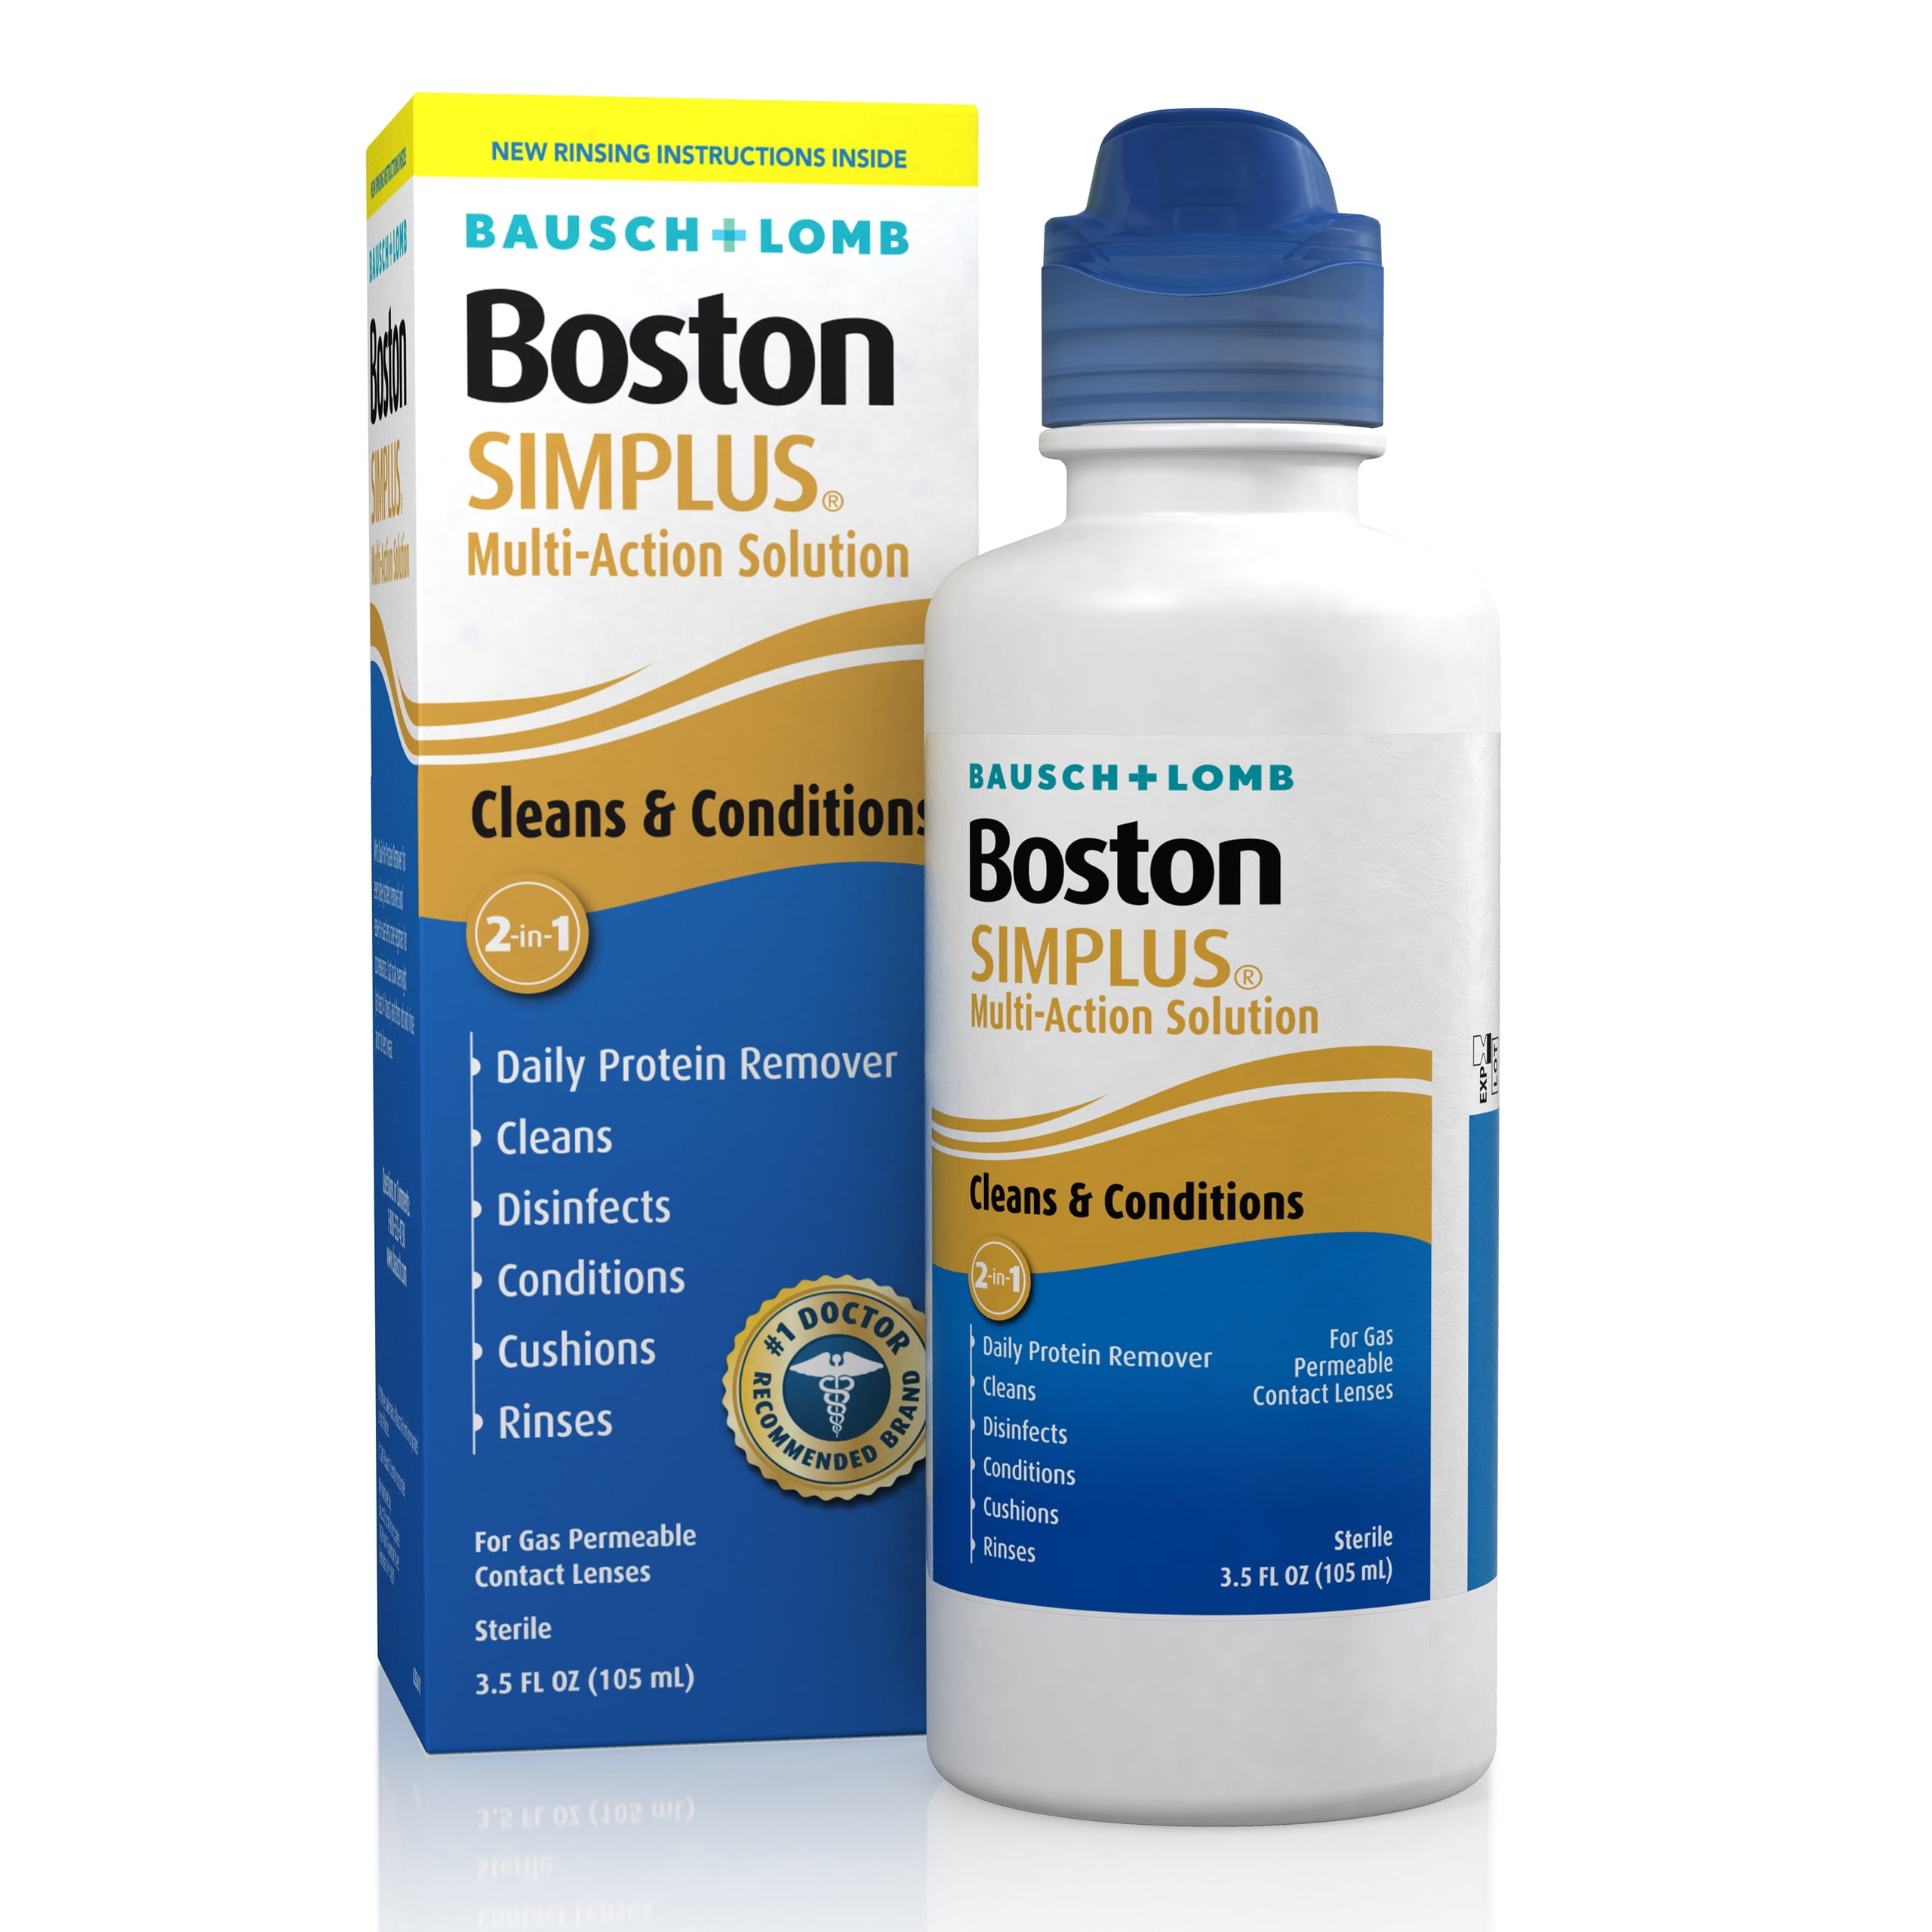 Boston SIMPLUS Multi-Action Contact Lens Solution to Clean and Condition Rigid Gas Permeable Lenses  from Bausch + Lomb, 3.5 fl. oz.